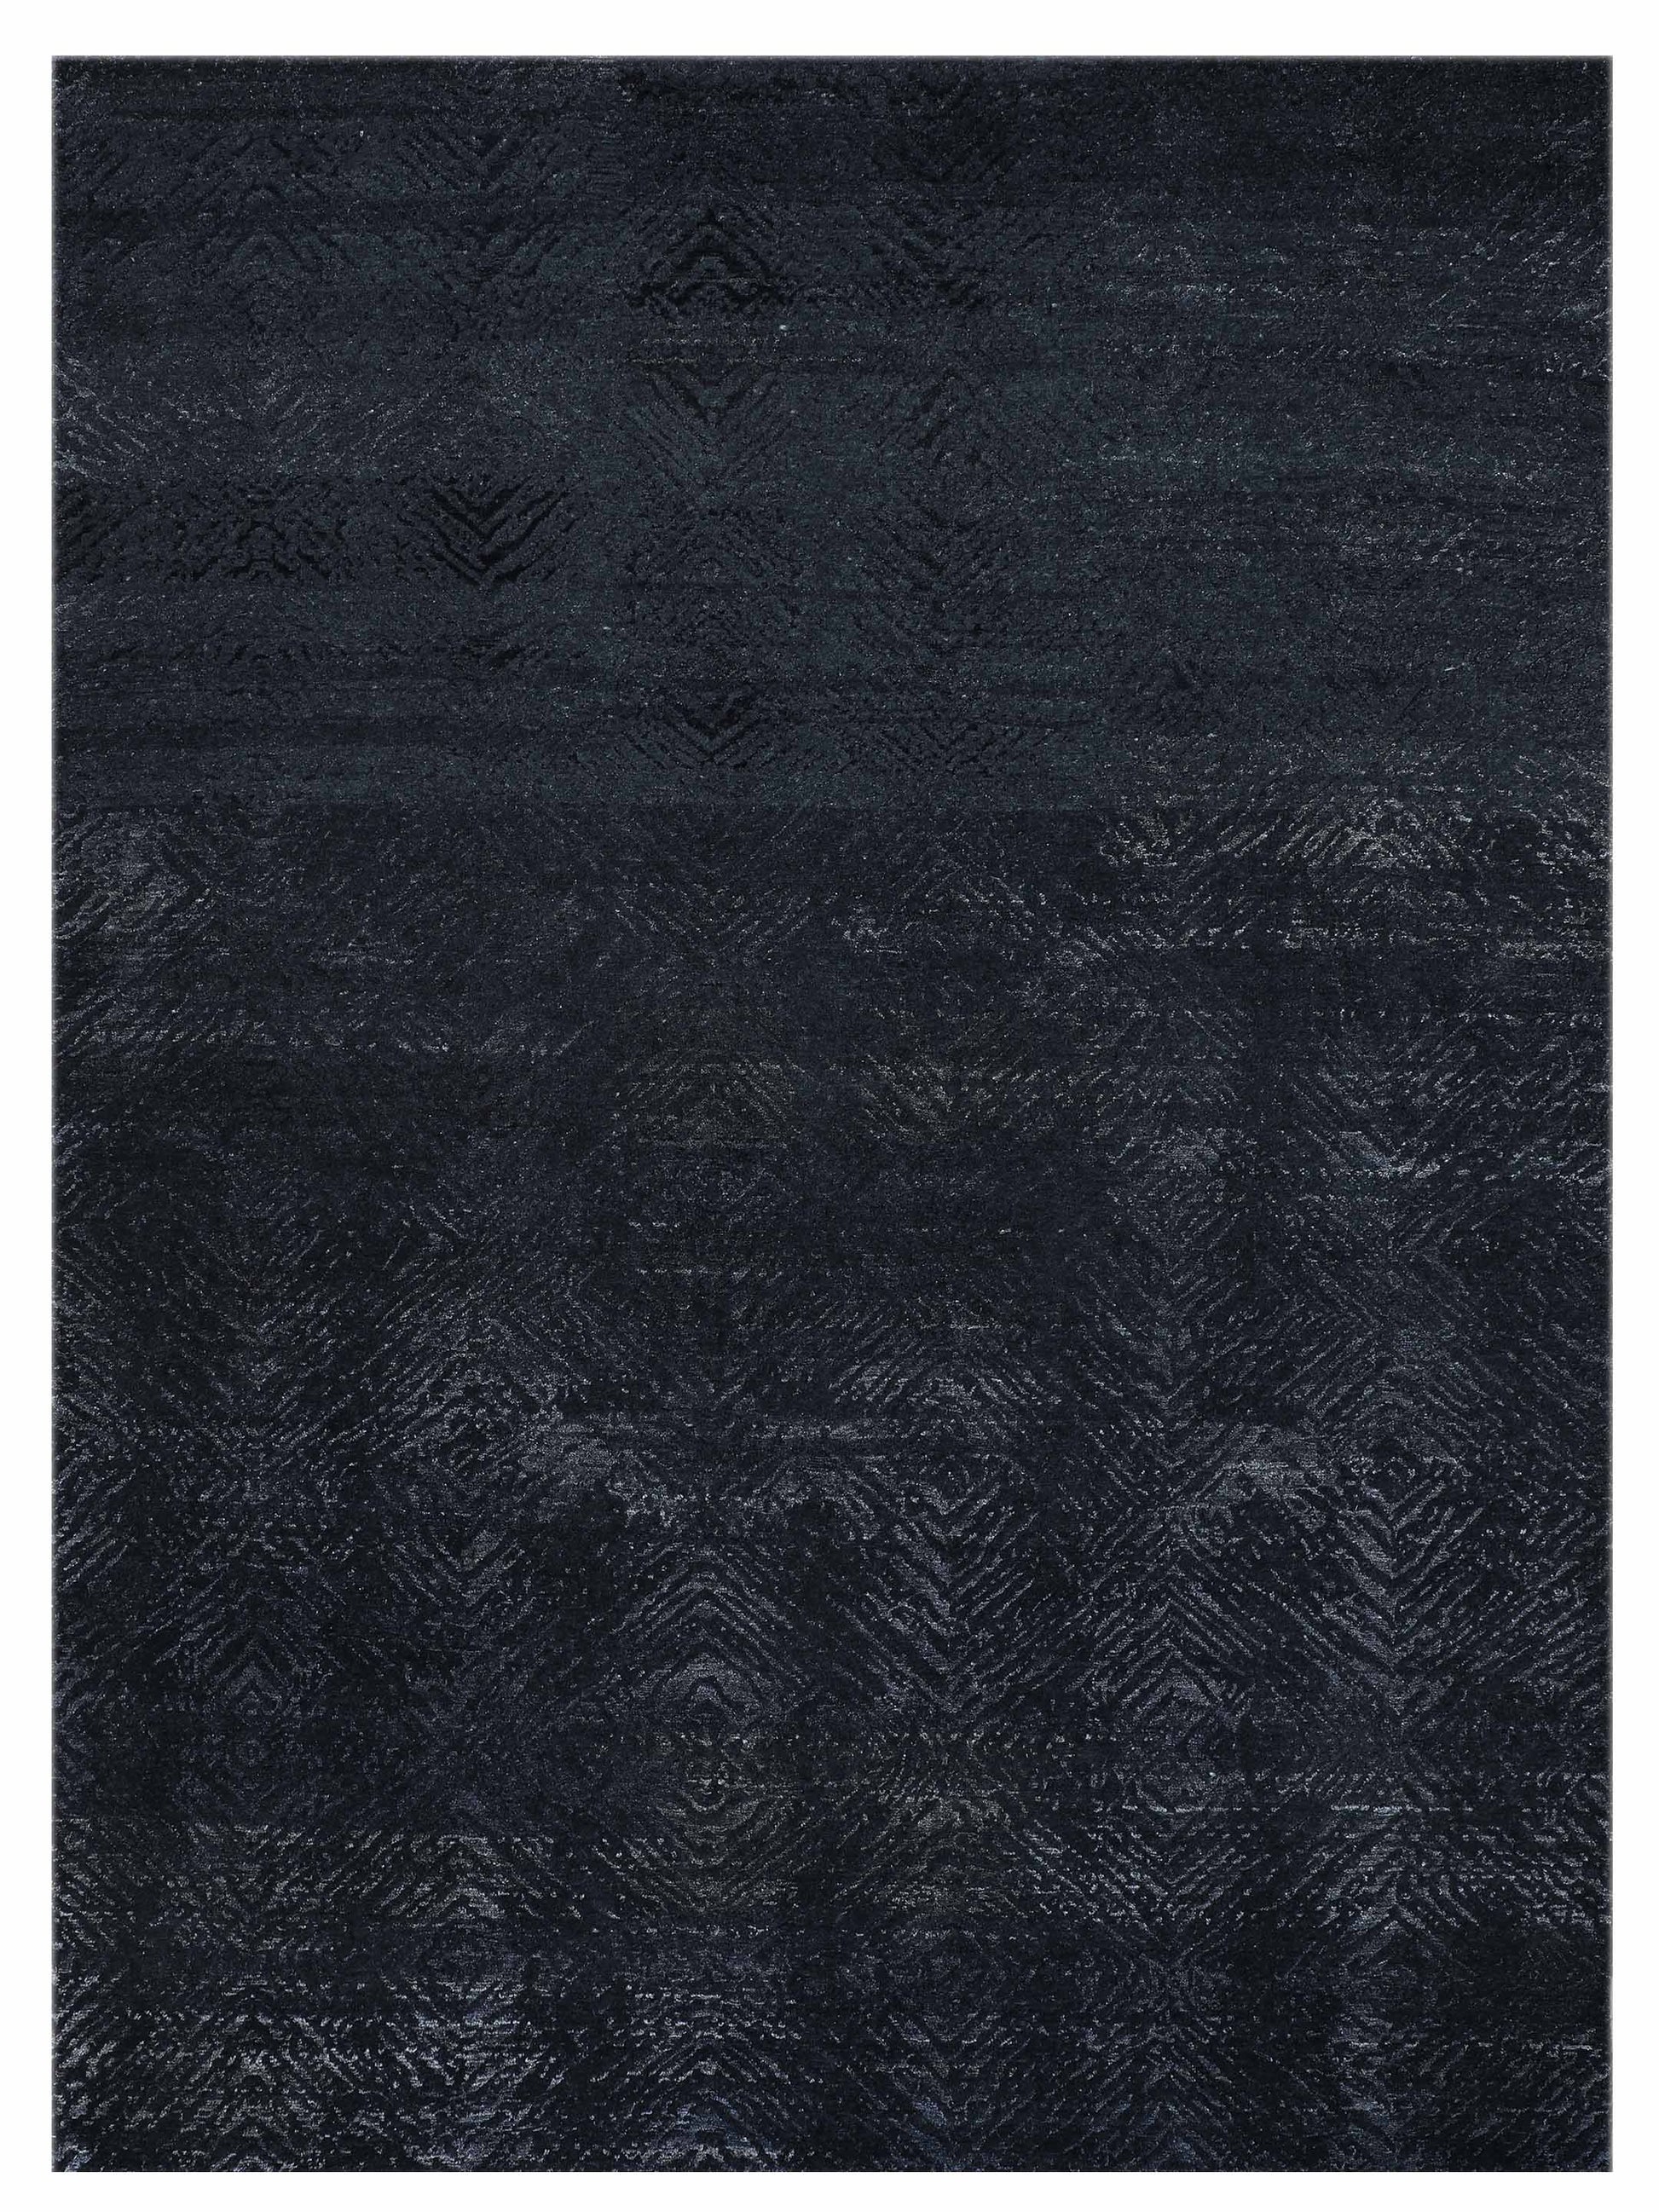 Artisan Mary MN-327 Carbon Contemporary Knotted Rug